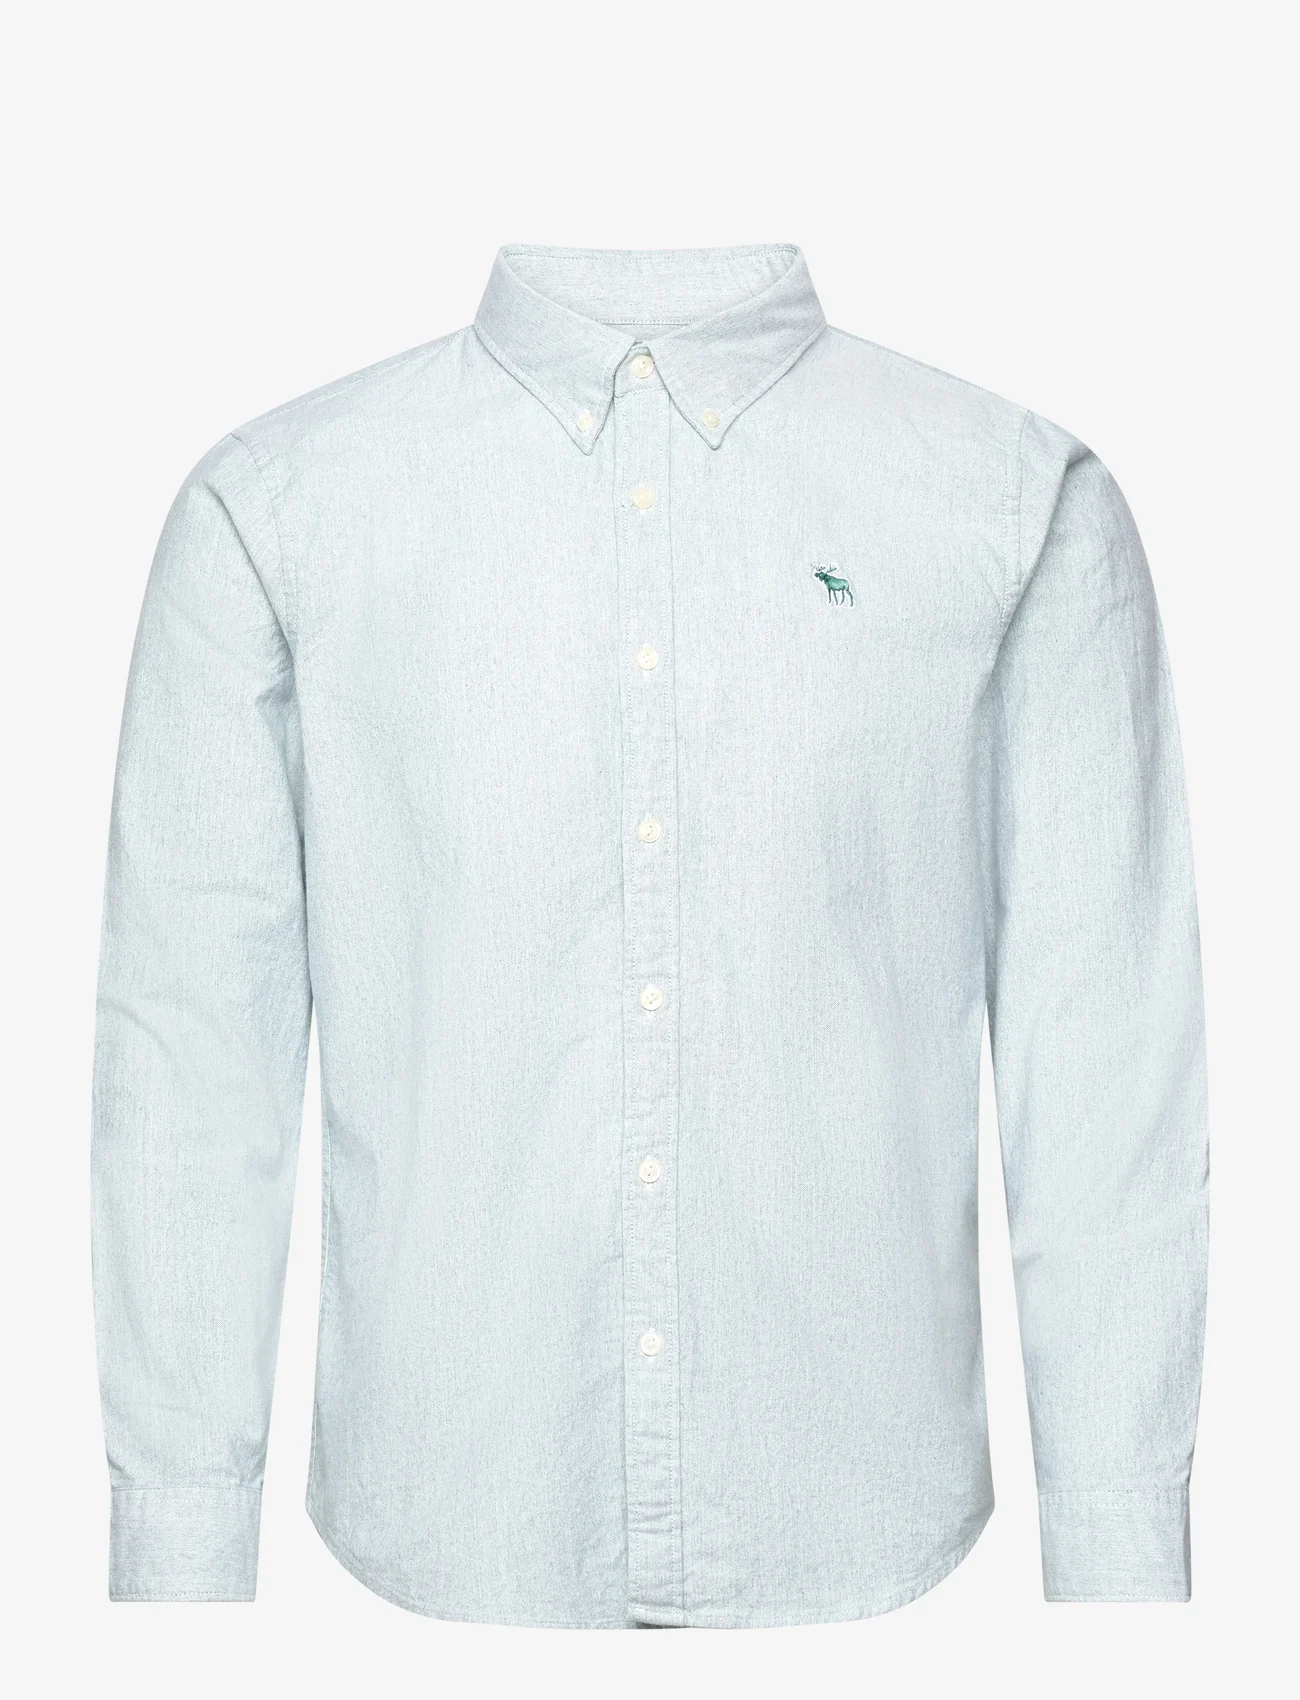 Abercrombie & Fitch - ANF MENS WOVENS - oxford-skjorter - blue spruce/white - 0